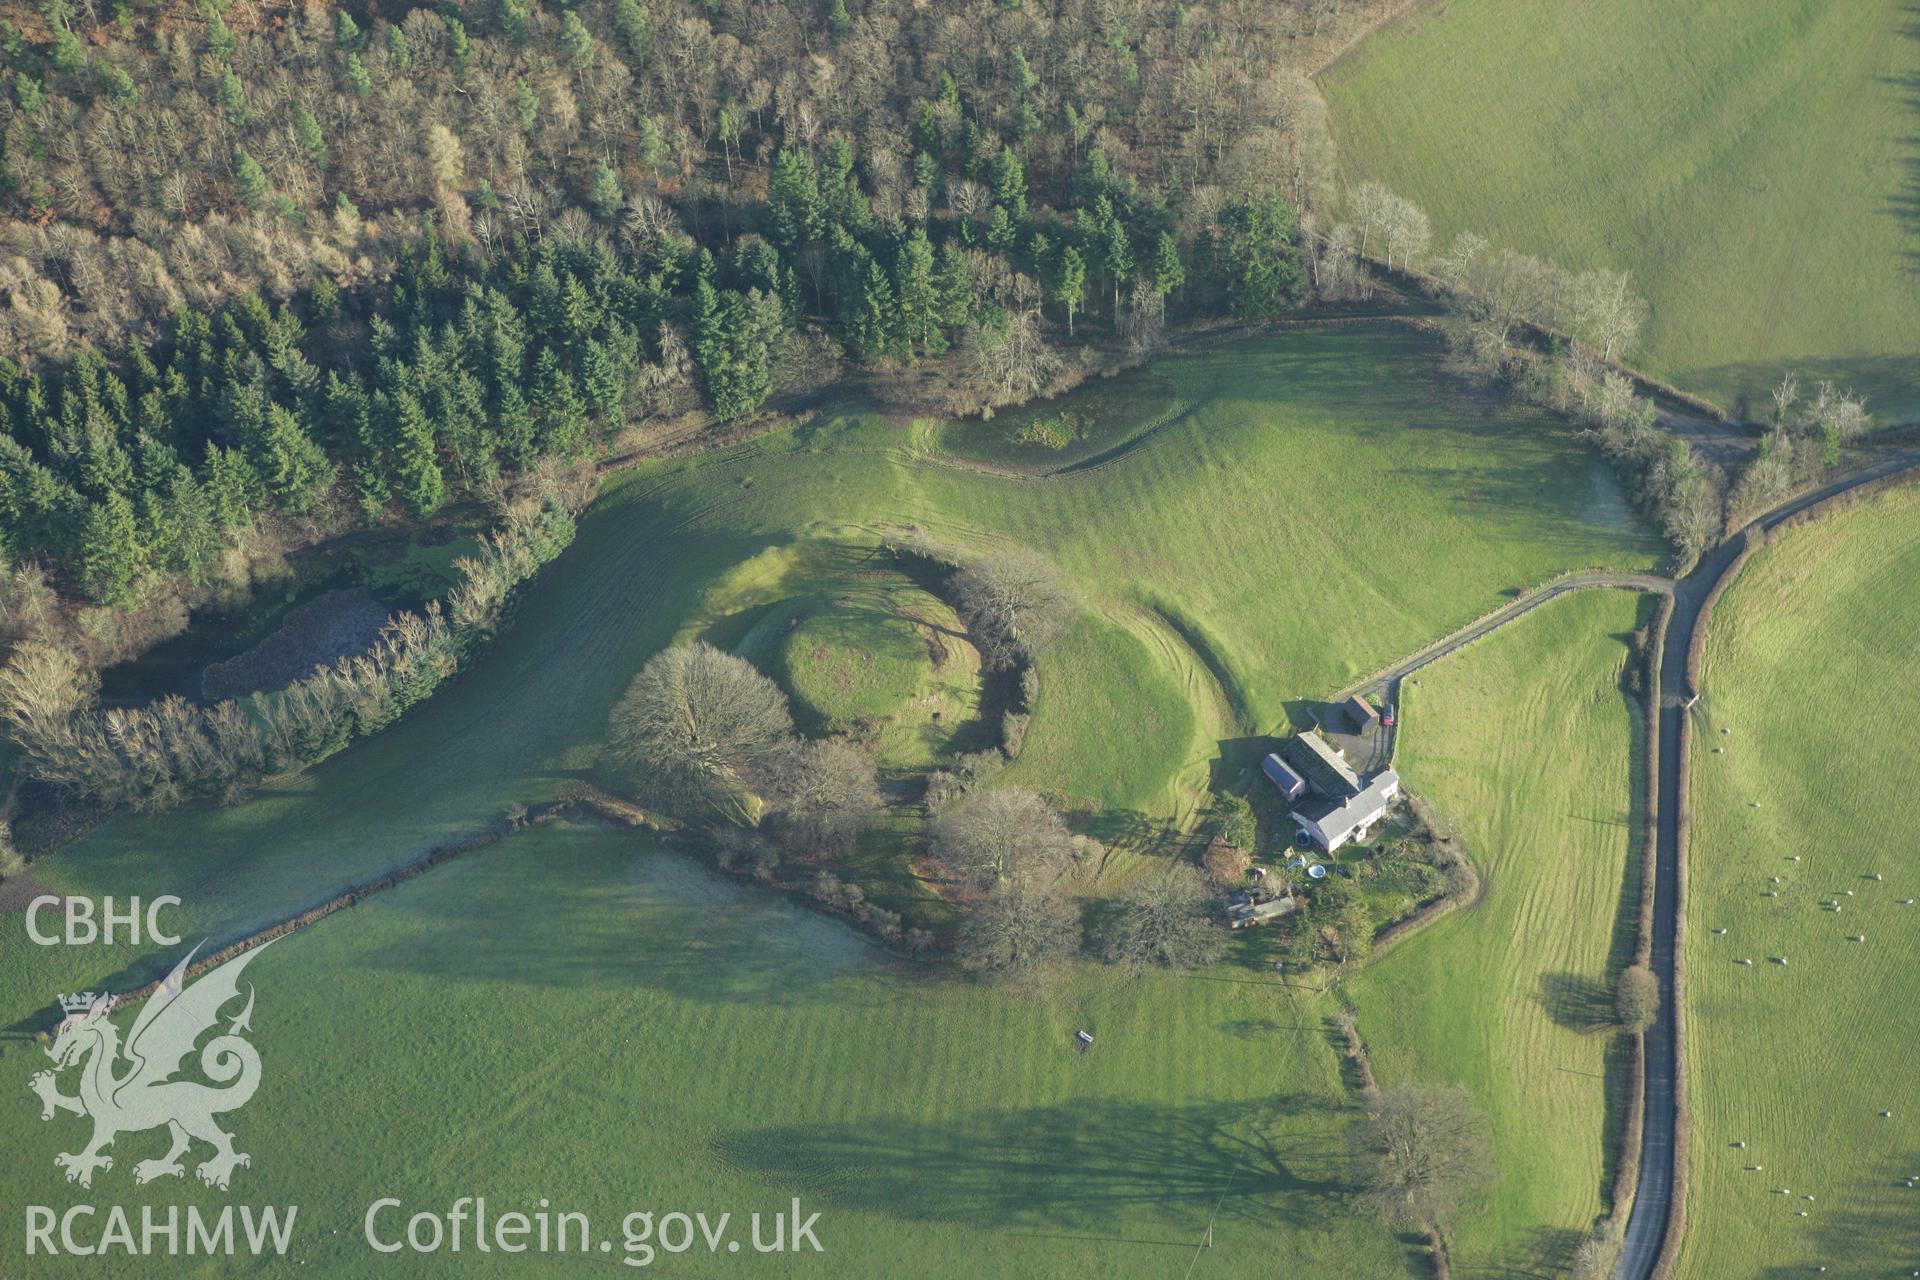 RCAHMW colour oblique photograph of Sycarth Castle, motte and bailey. Taken by Toby Driver on 11/12/2007.